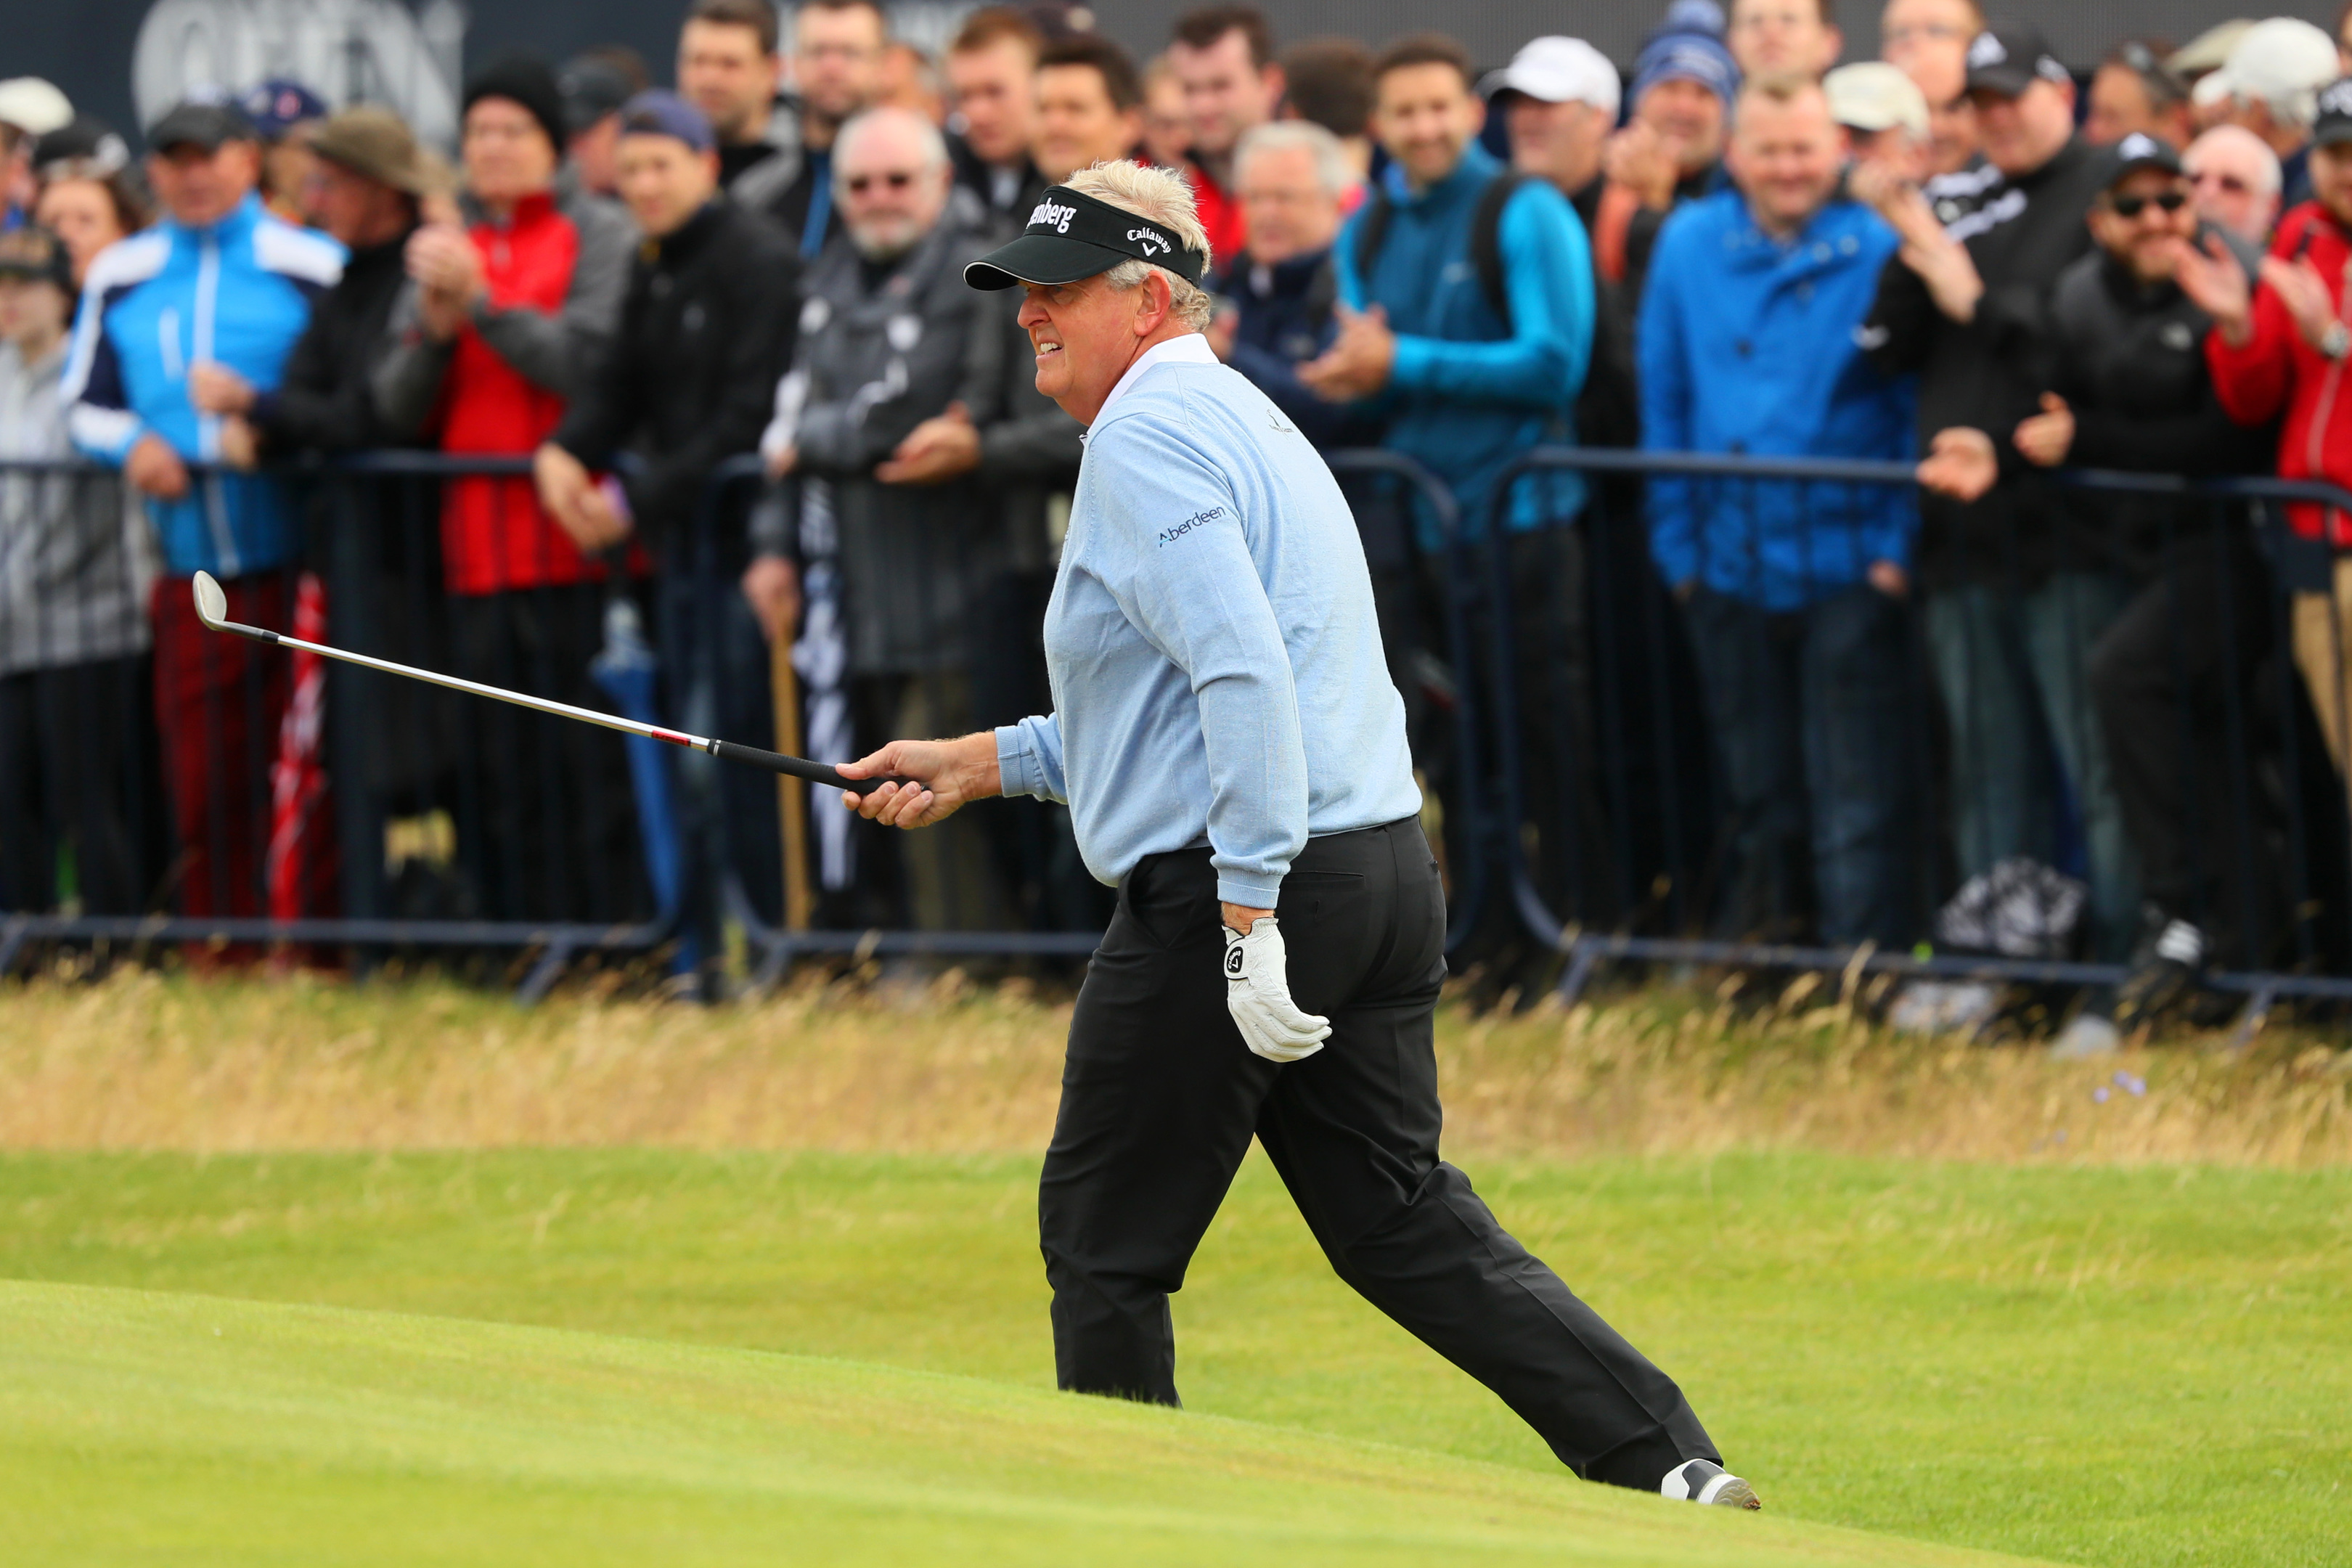 Colin Montgomerie's 76 included a dunk in the Barry Burn at the last